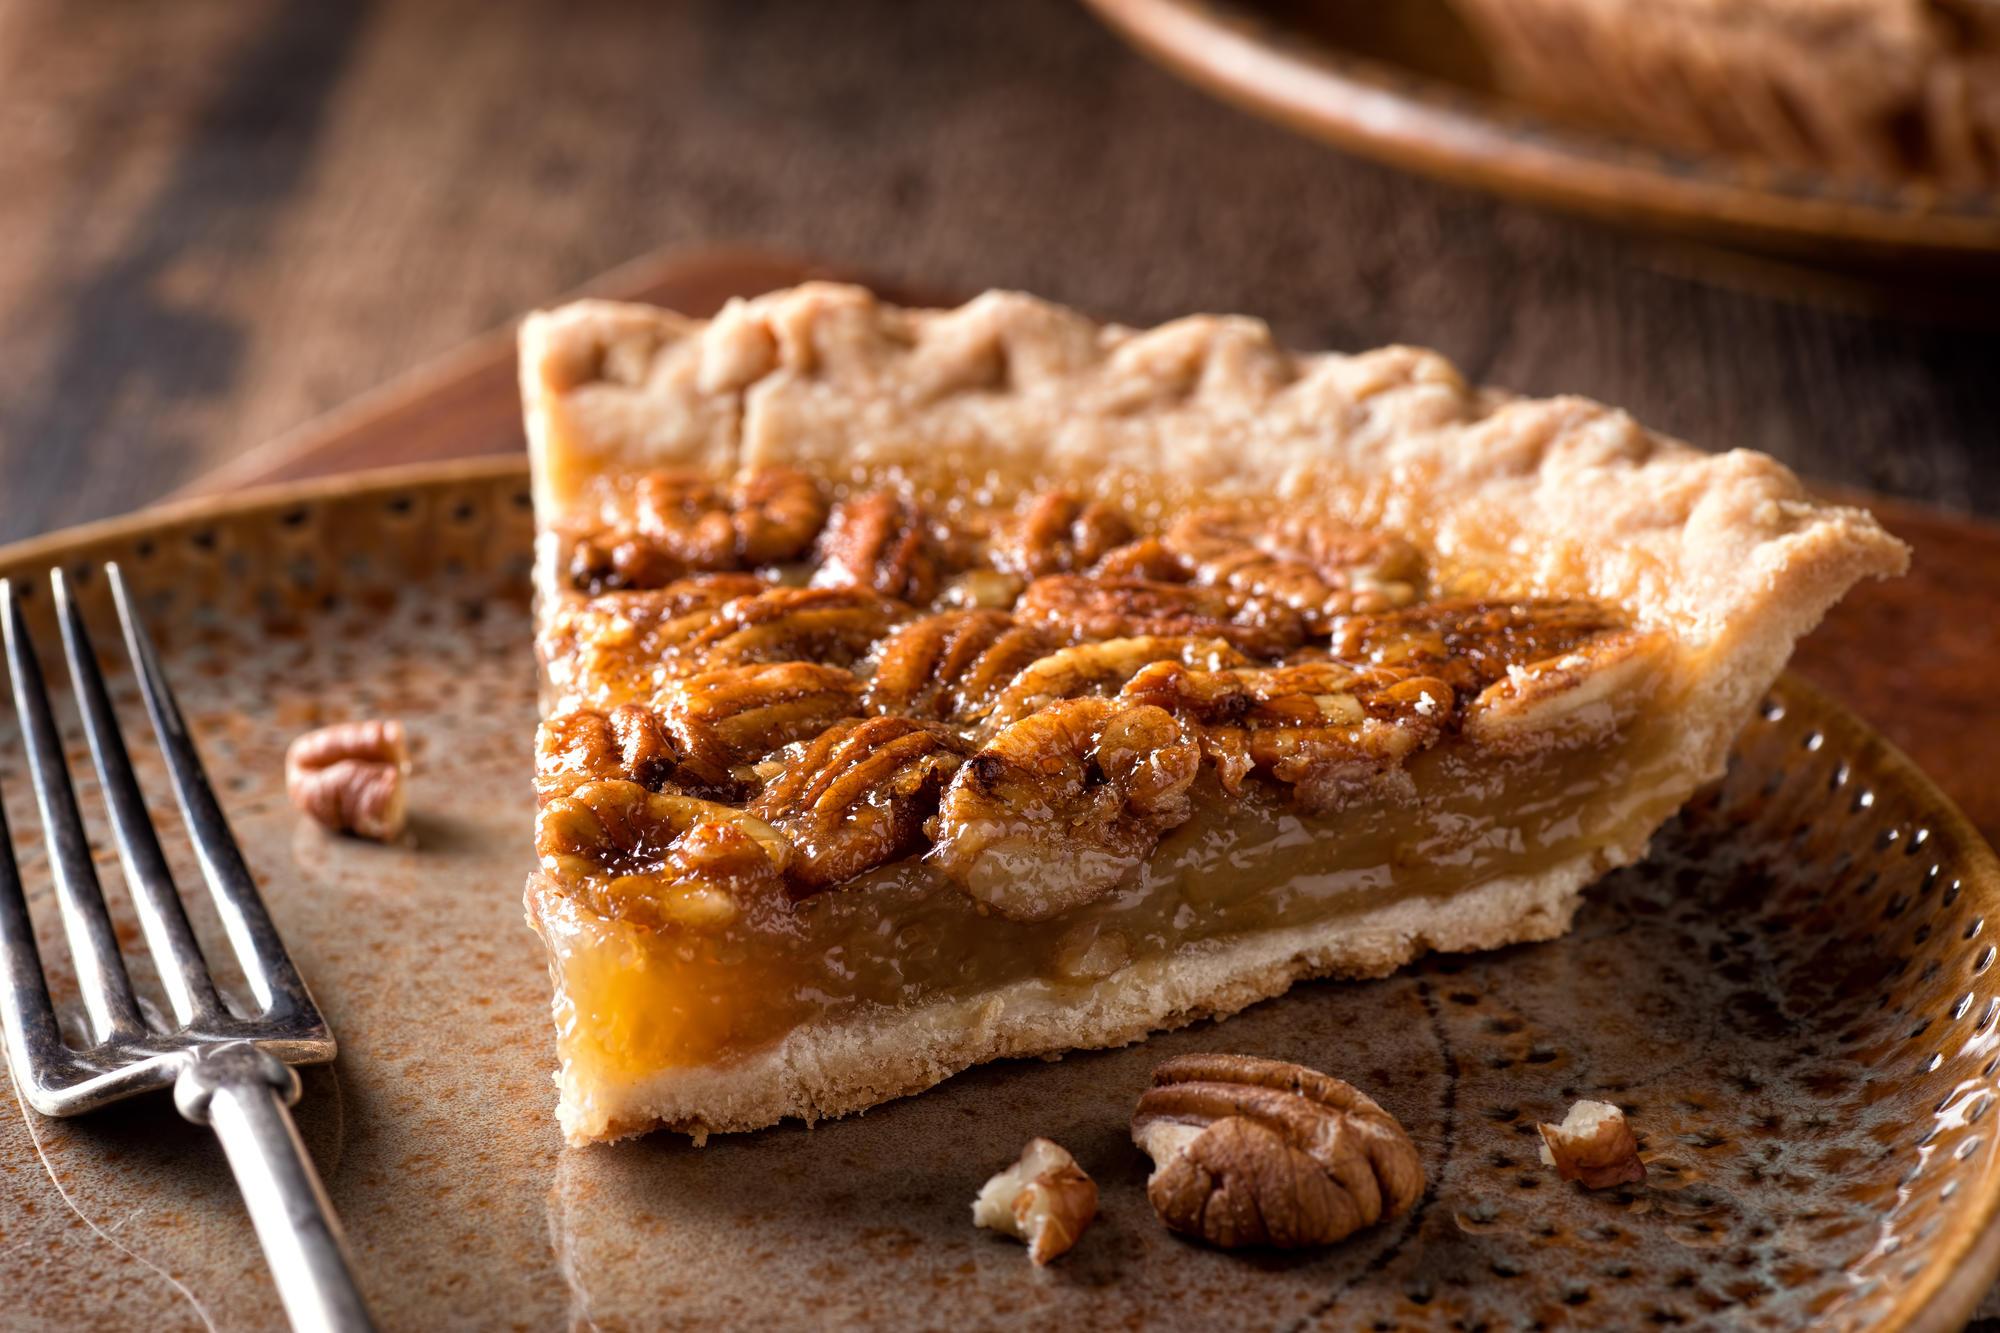 A slice of pecan pie on a plate.